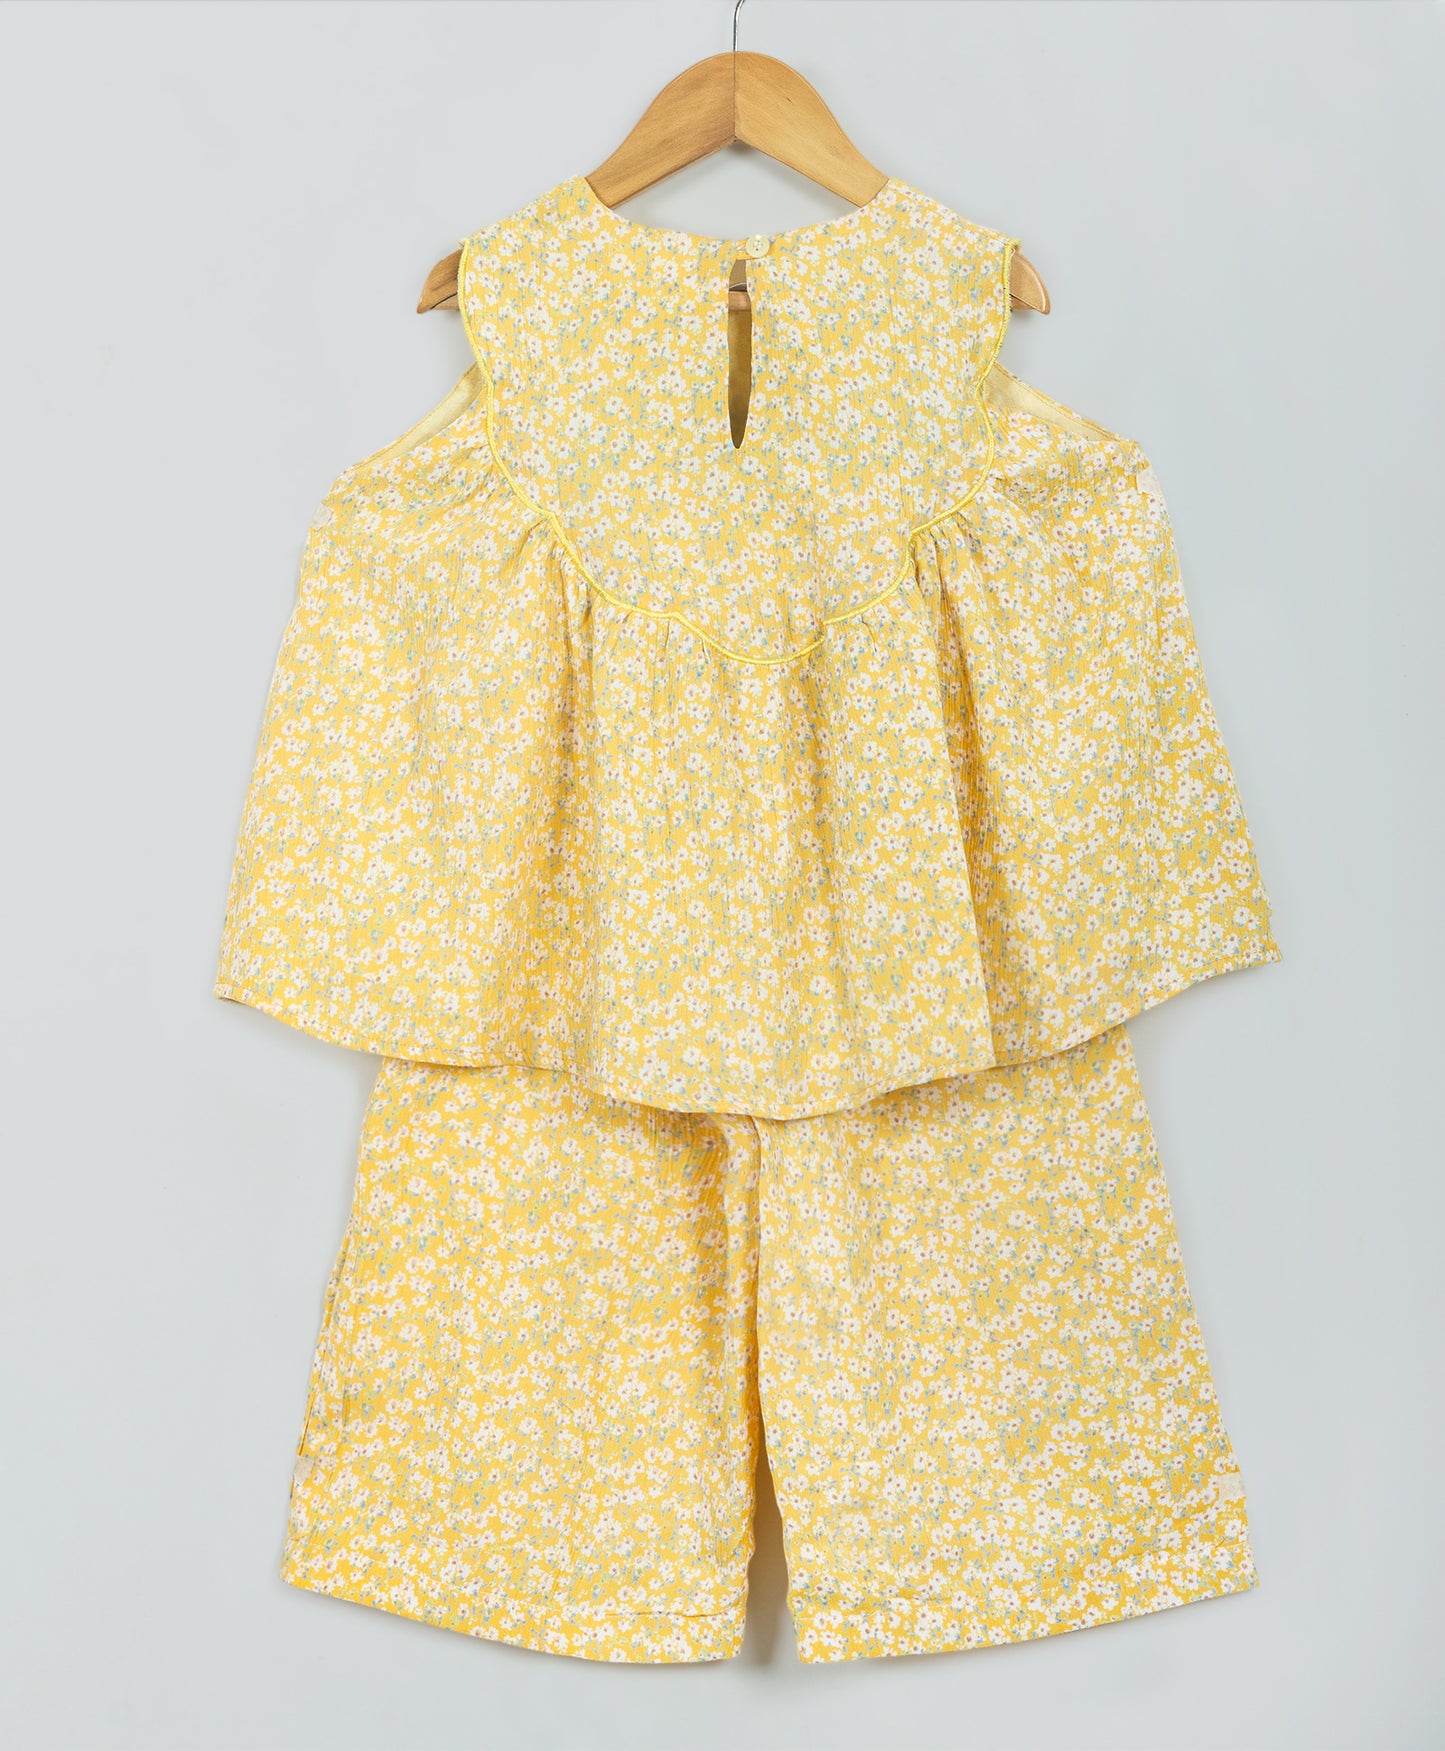 YELLOW DITSY FLORAL COORDINATE SET WITH EMBROIDERY AT YOKE